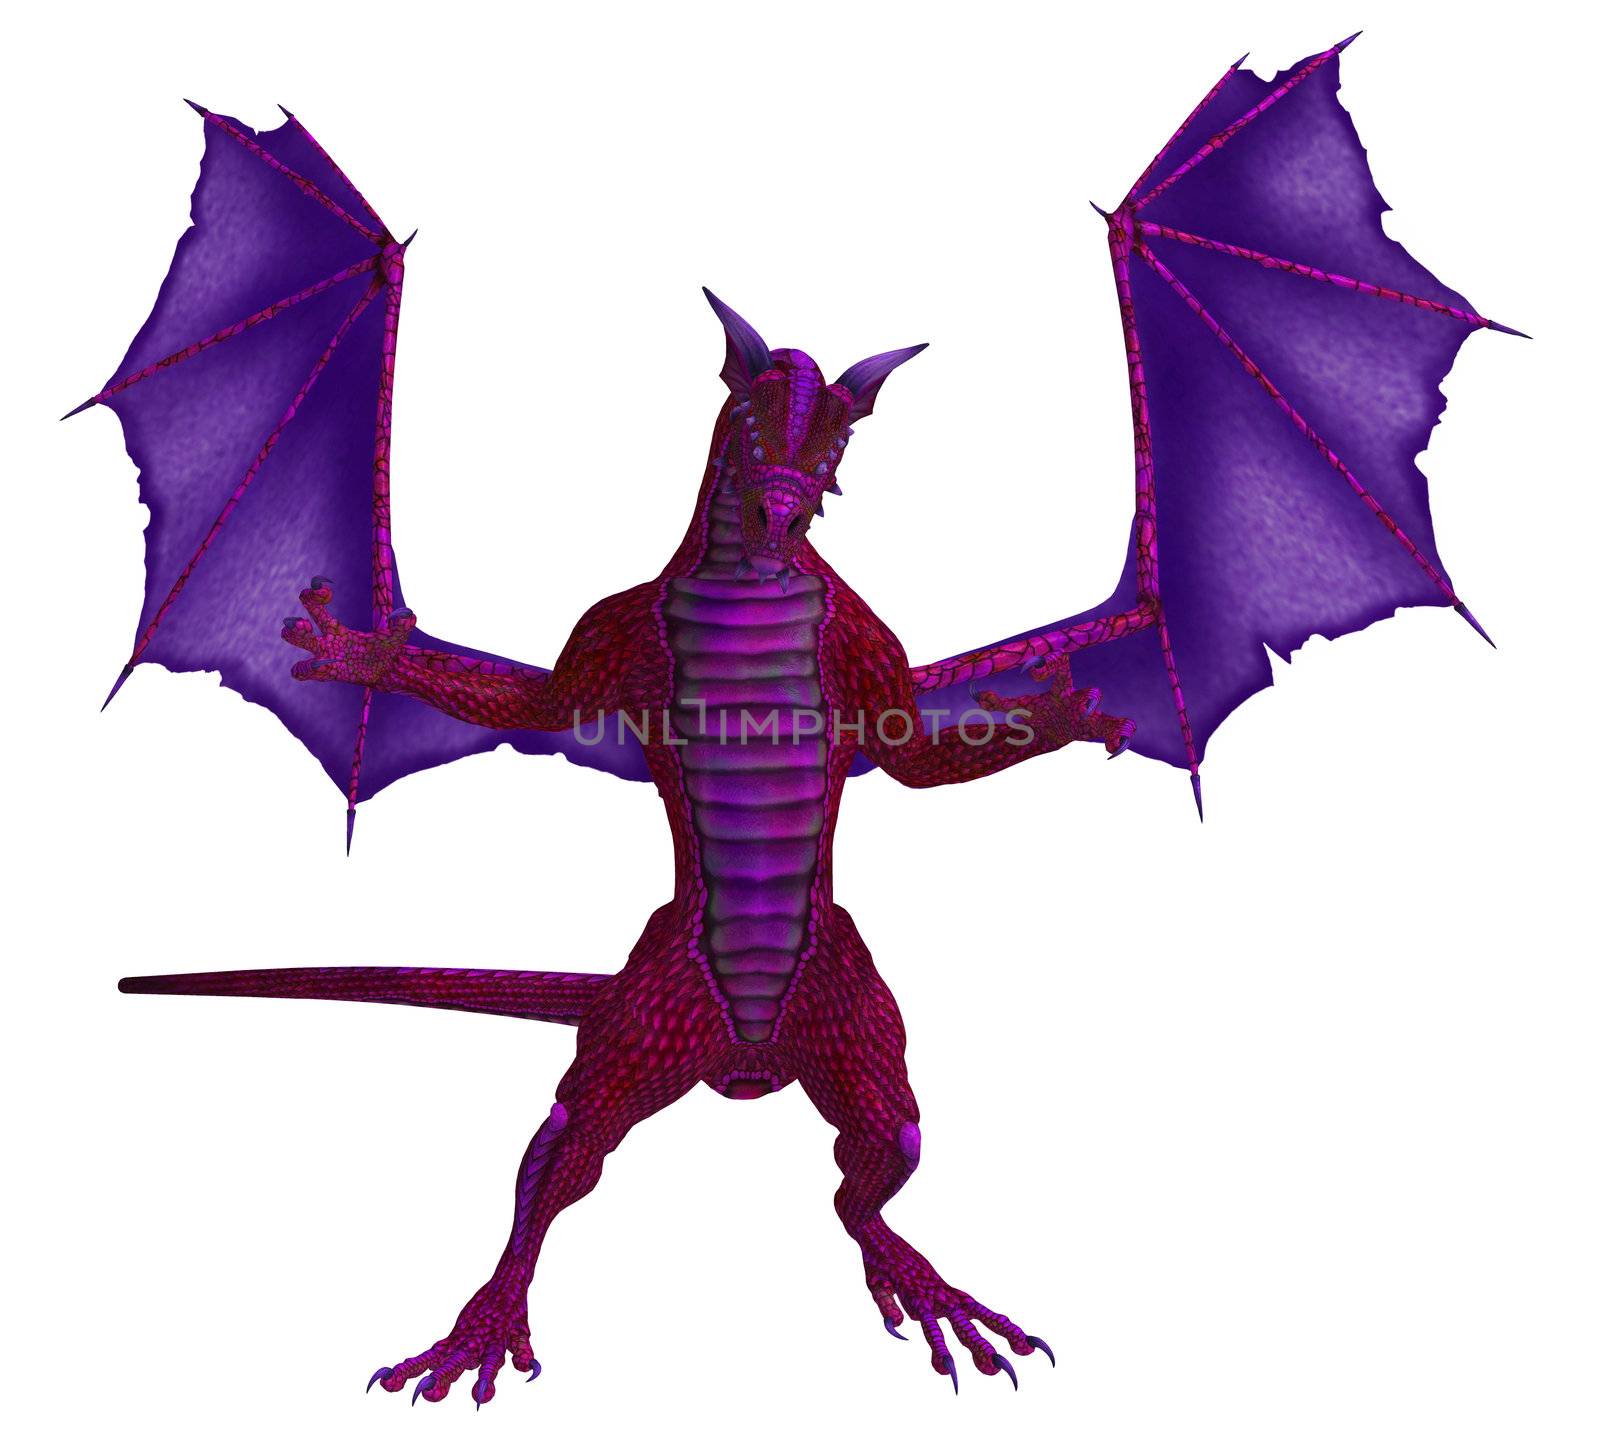 Pink purple dragon standing with wings spread